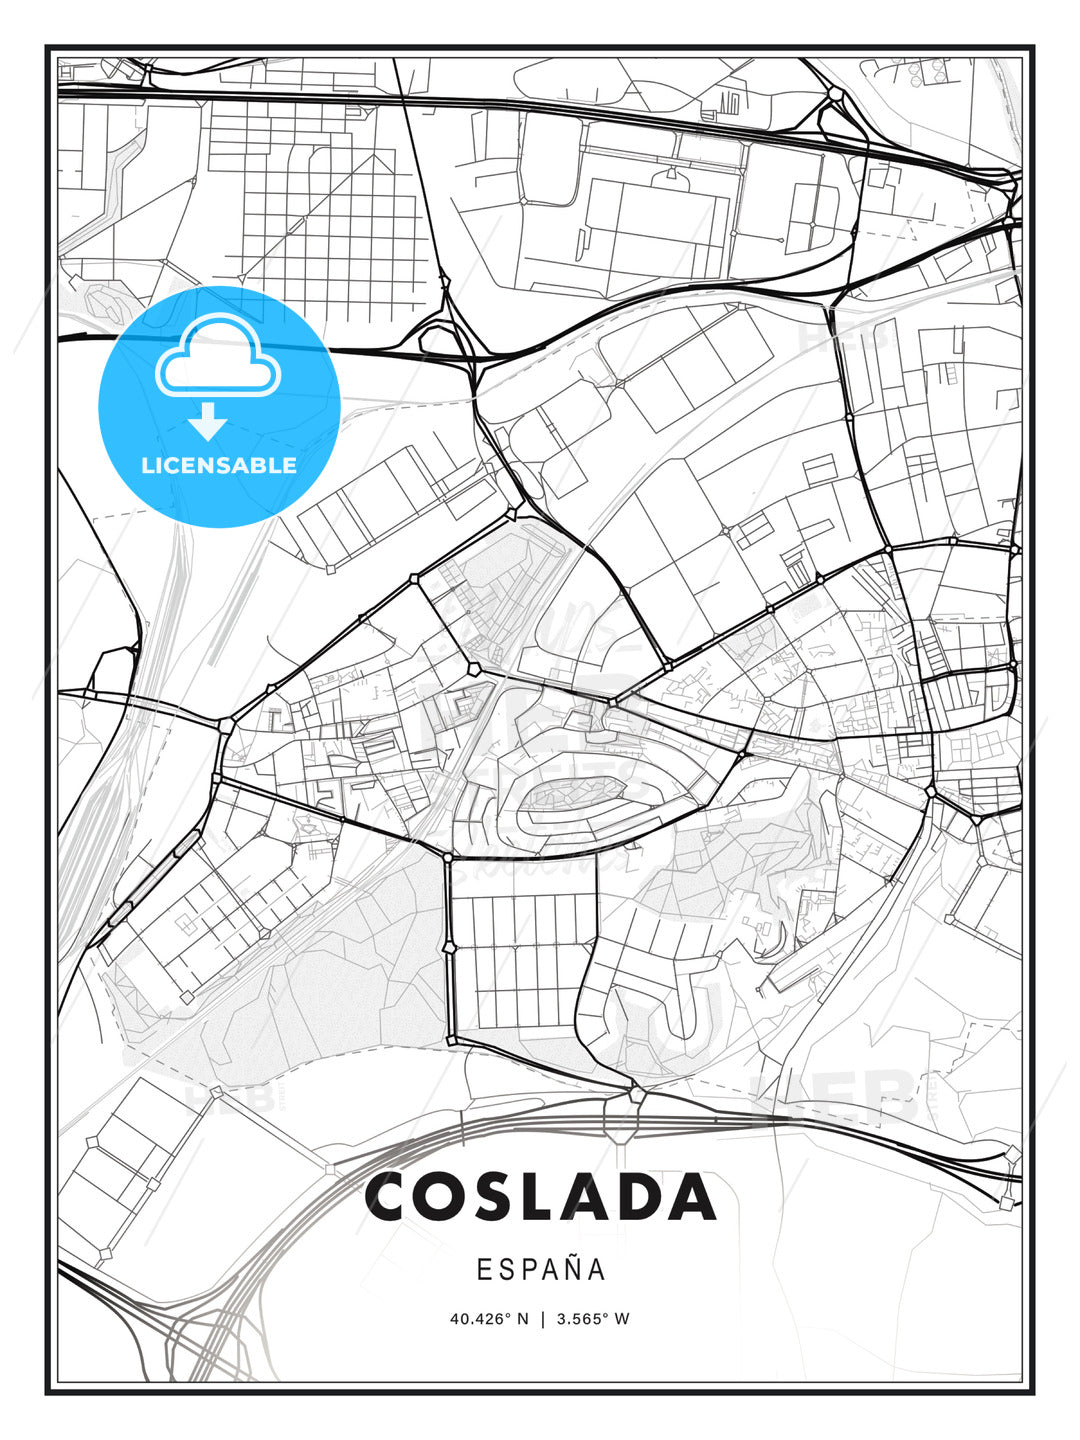 Coslada, Spain, Modern Print Template in Various Formats - HEBSTREITS Sketches